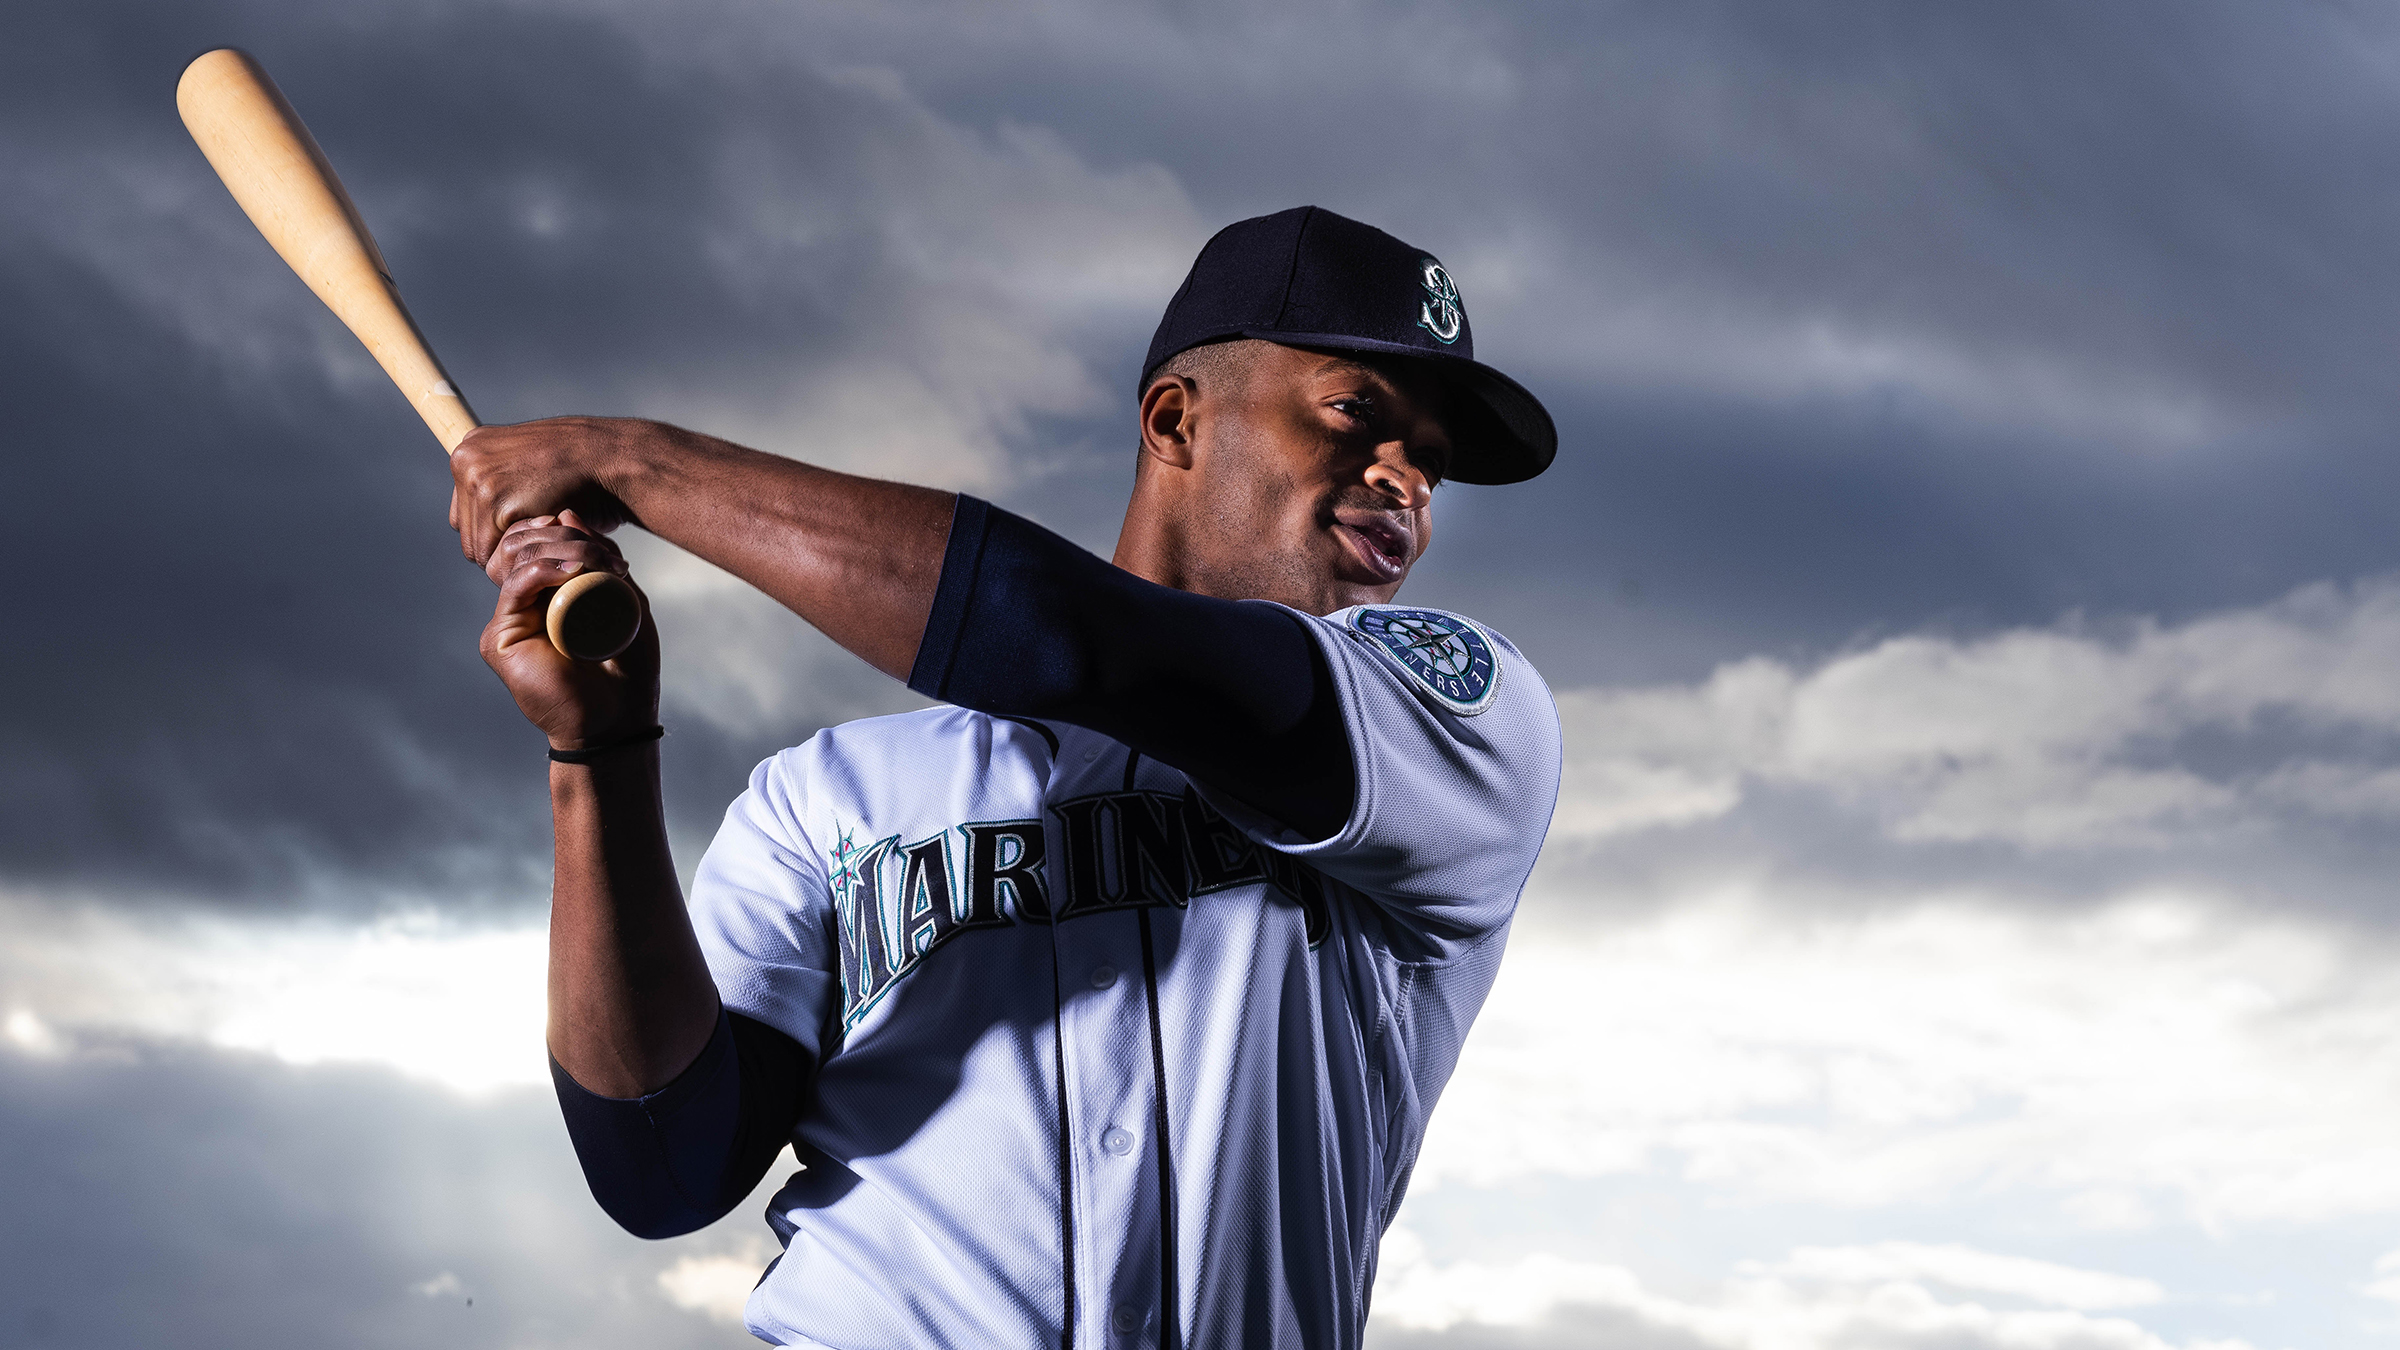 Meet the 2019 Mariners starting lineup